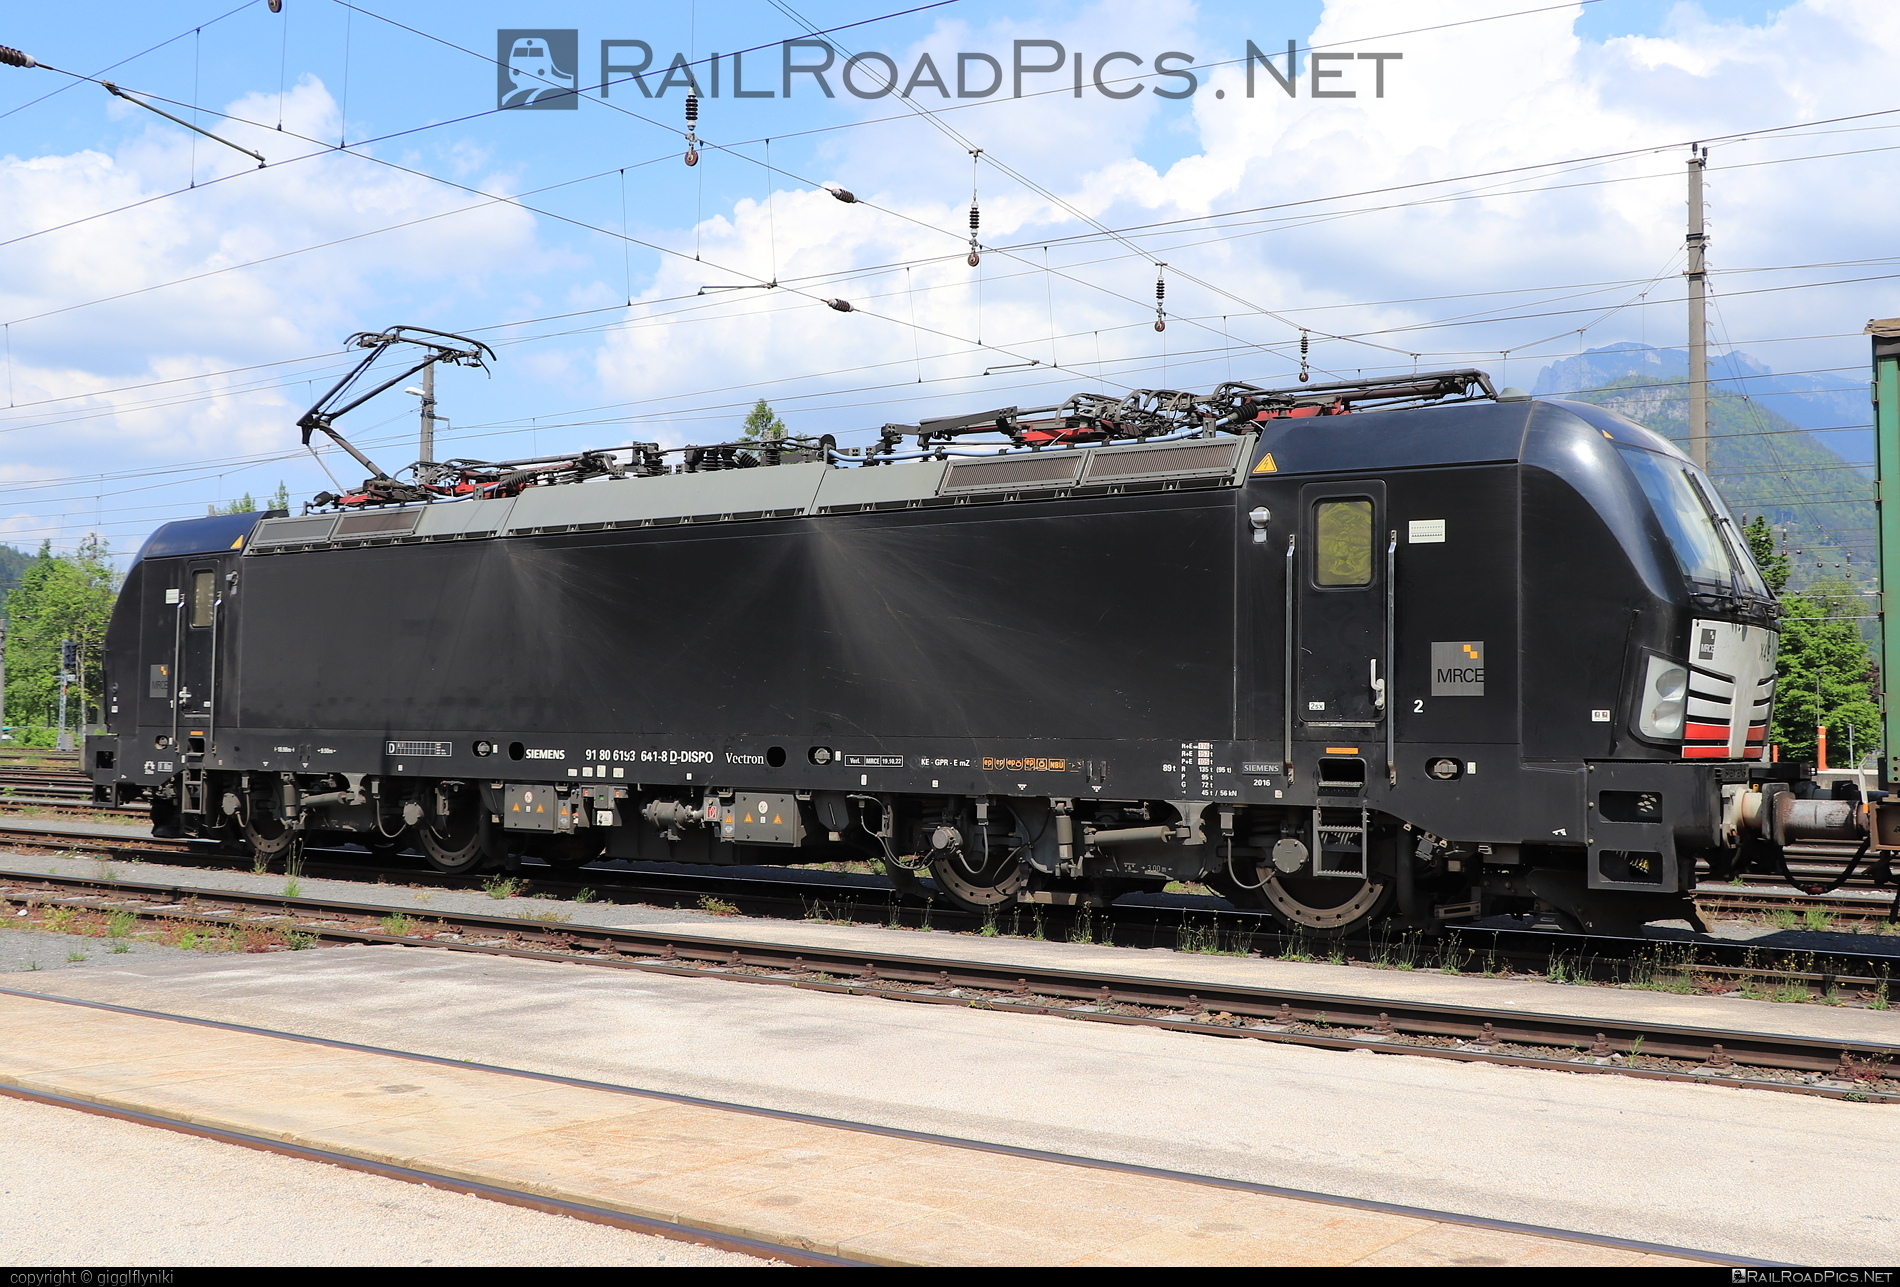 Siemens Vectron MS - 193 641 operated by TXLogistik #dispolok #mitsuirailcapitaleurope #mitsuirailcapitaleuropegmbh #mrce #siemens #siemensVectron #siemensVectronMS #txlogistik #vectron #vectronMS